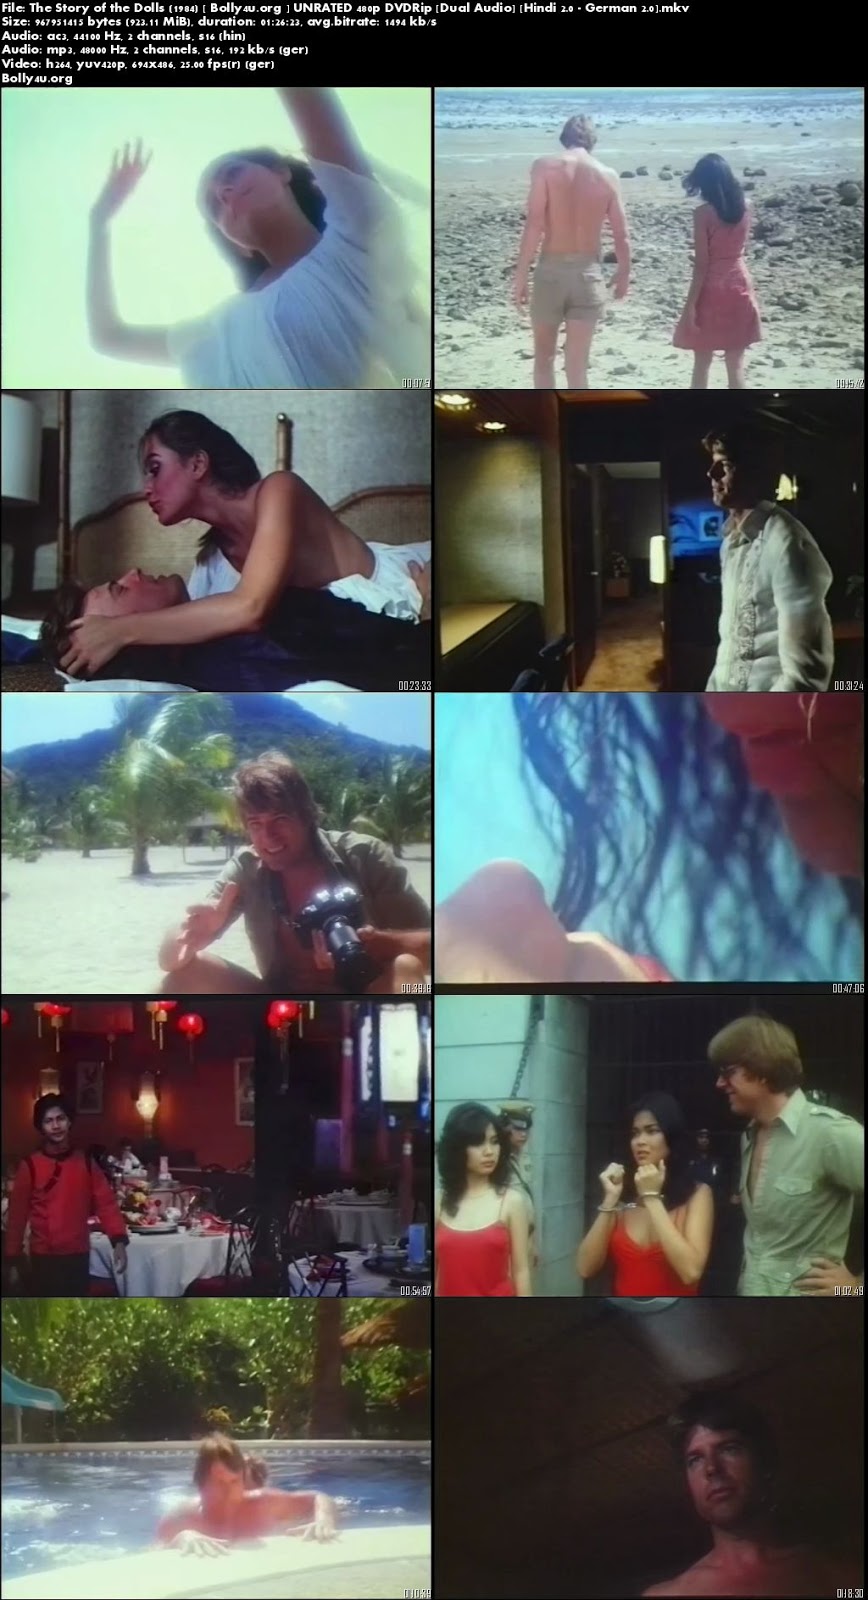 [18+] The Story of the Dolls 1984 DVDRip Hindi 280MB Dual Audio 480p Download